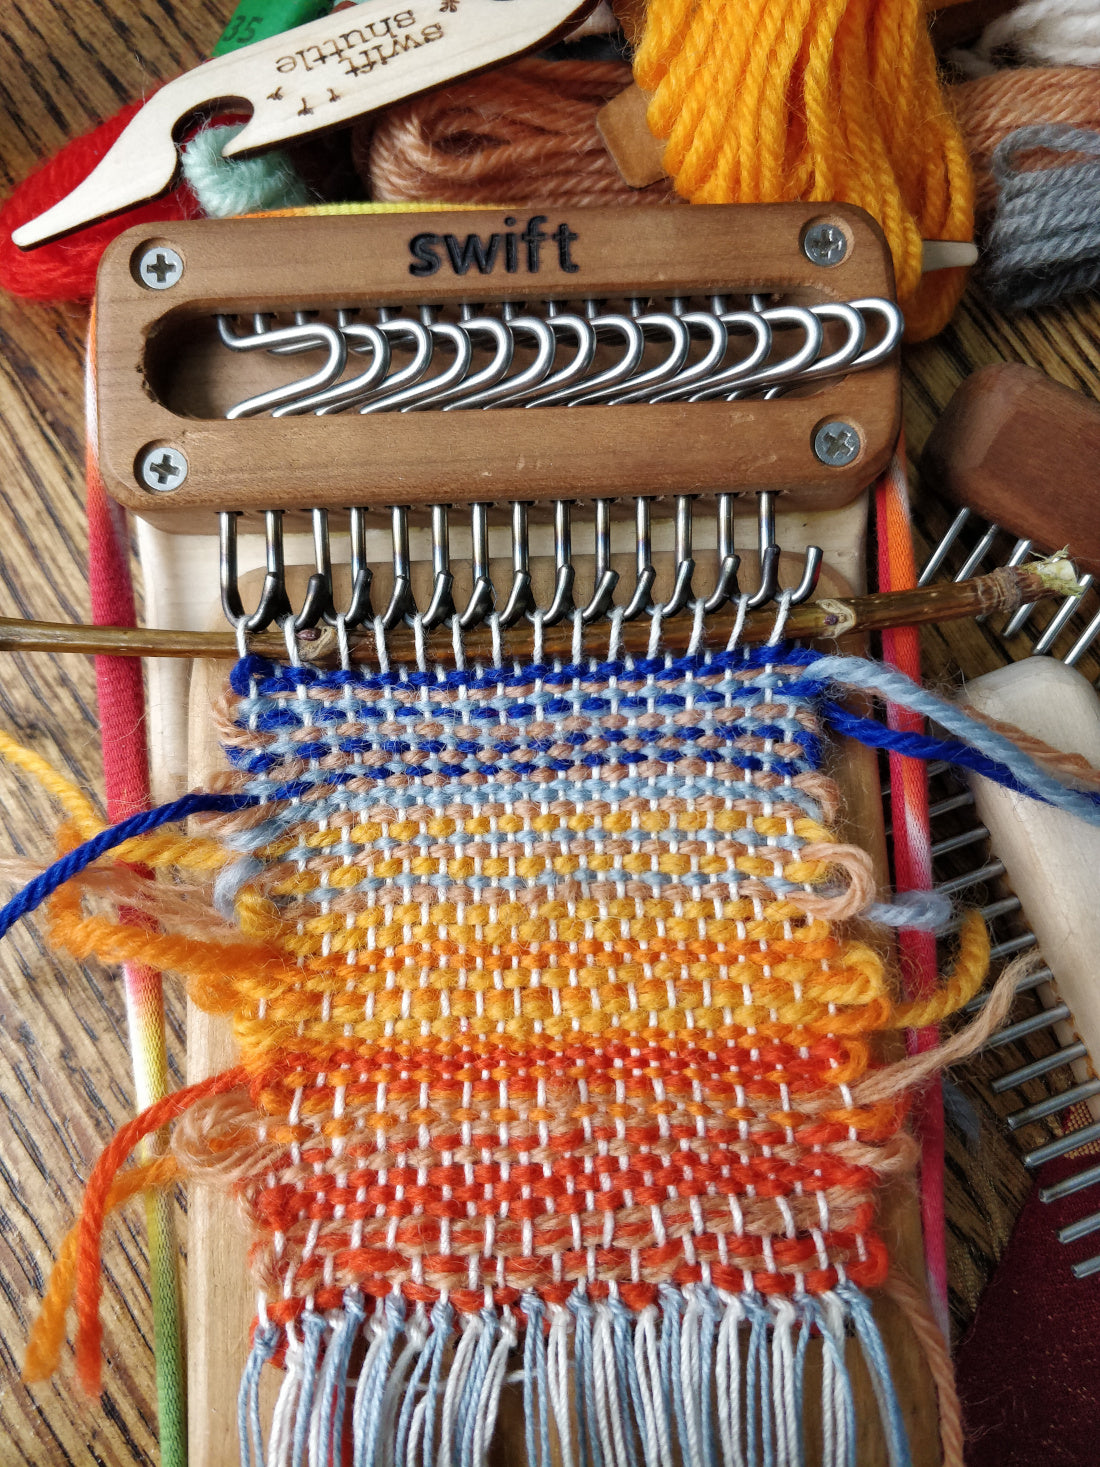 Weaving with the Swift Loom